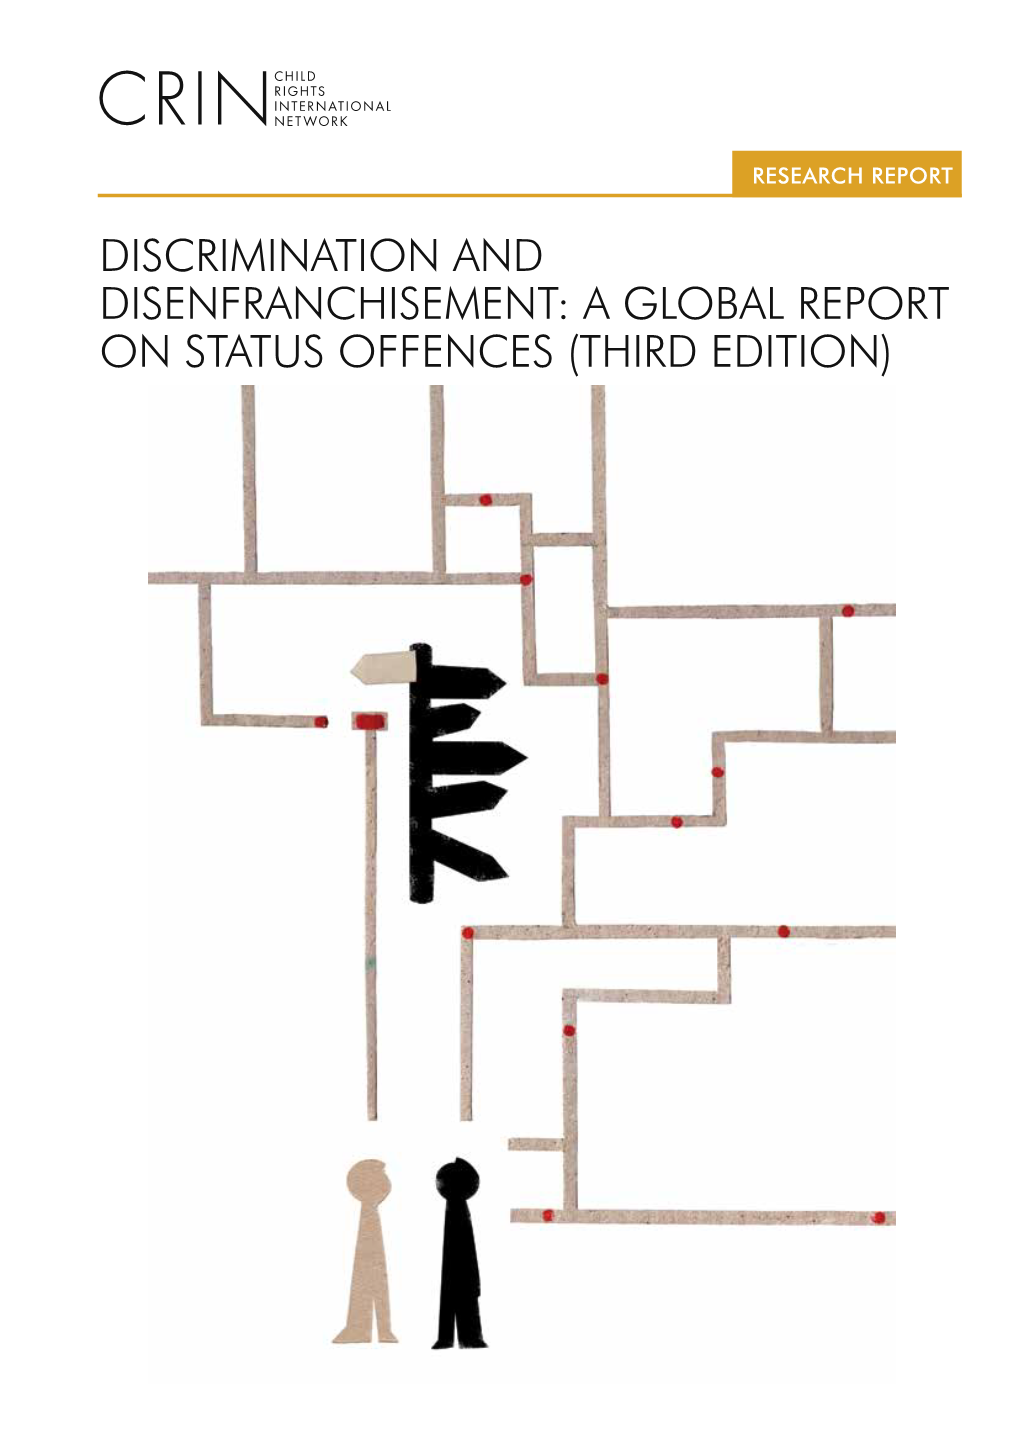 A Global Report on Status Offences (Third Edition) 2 —